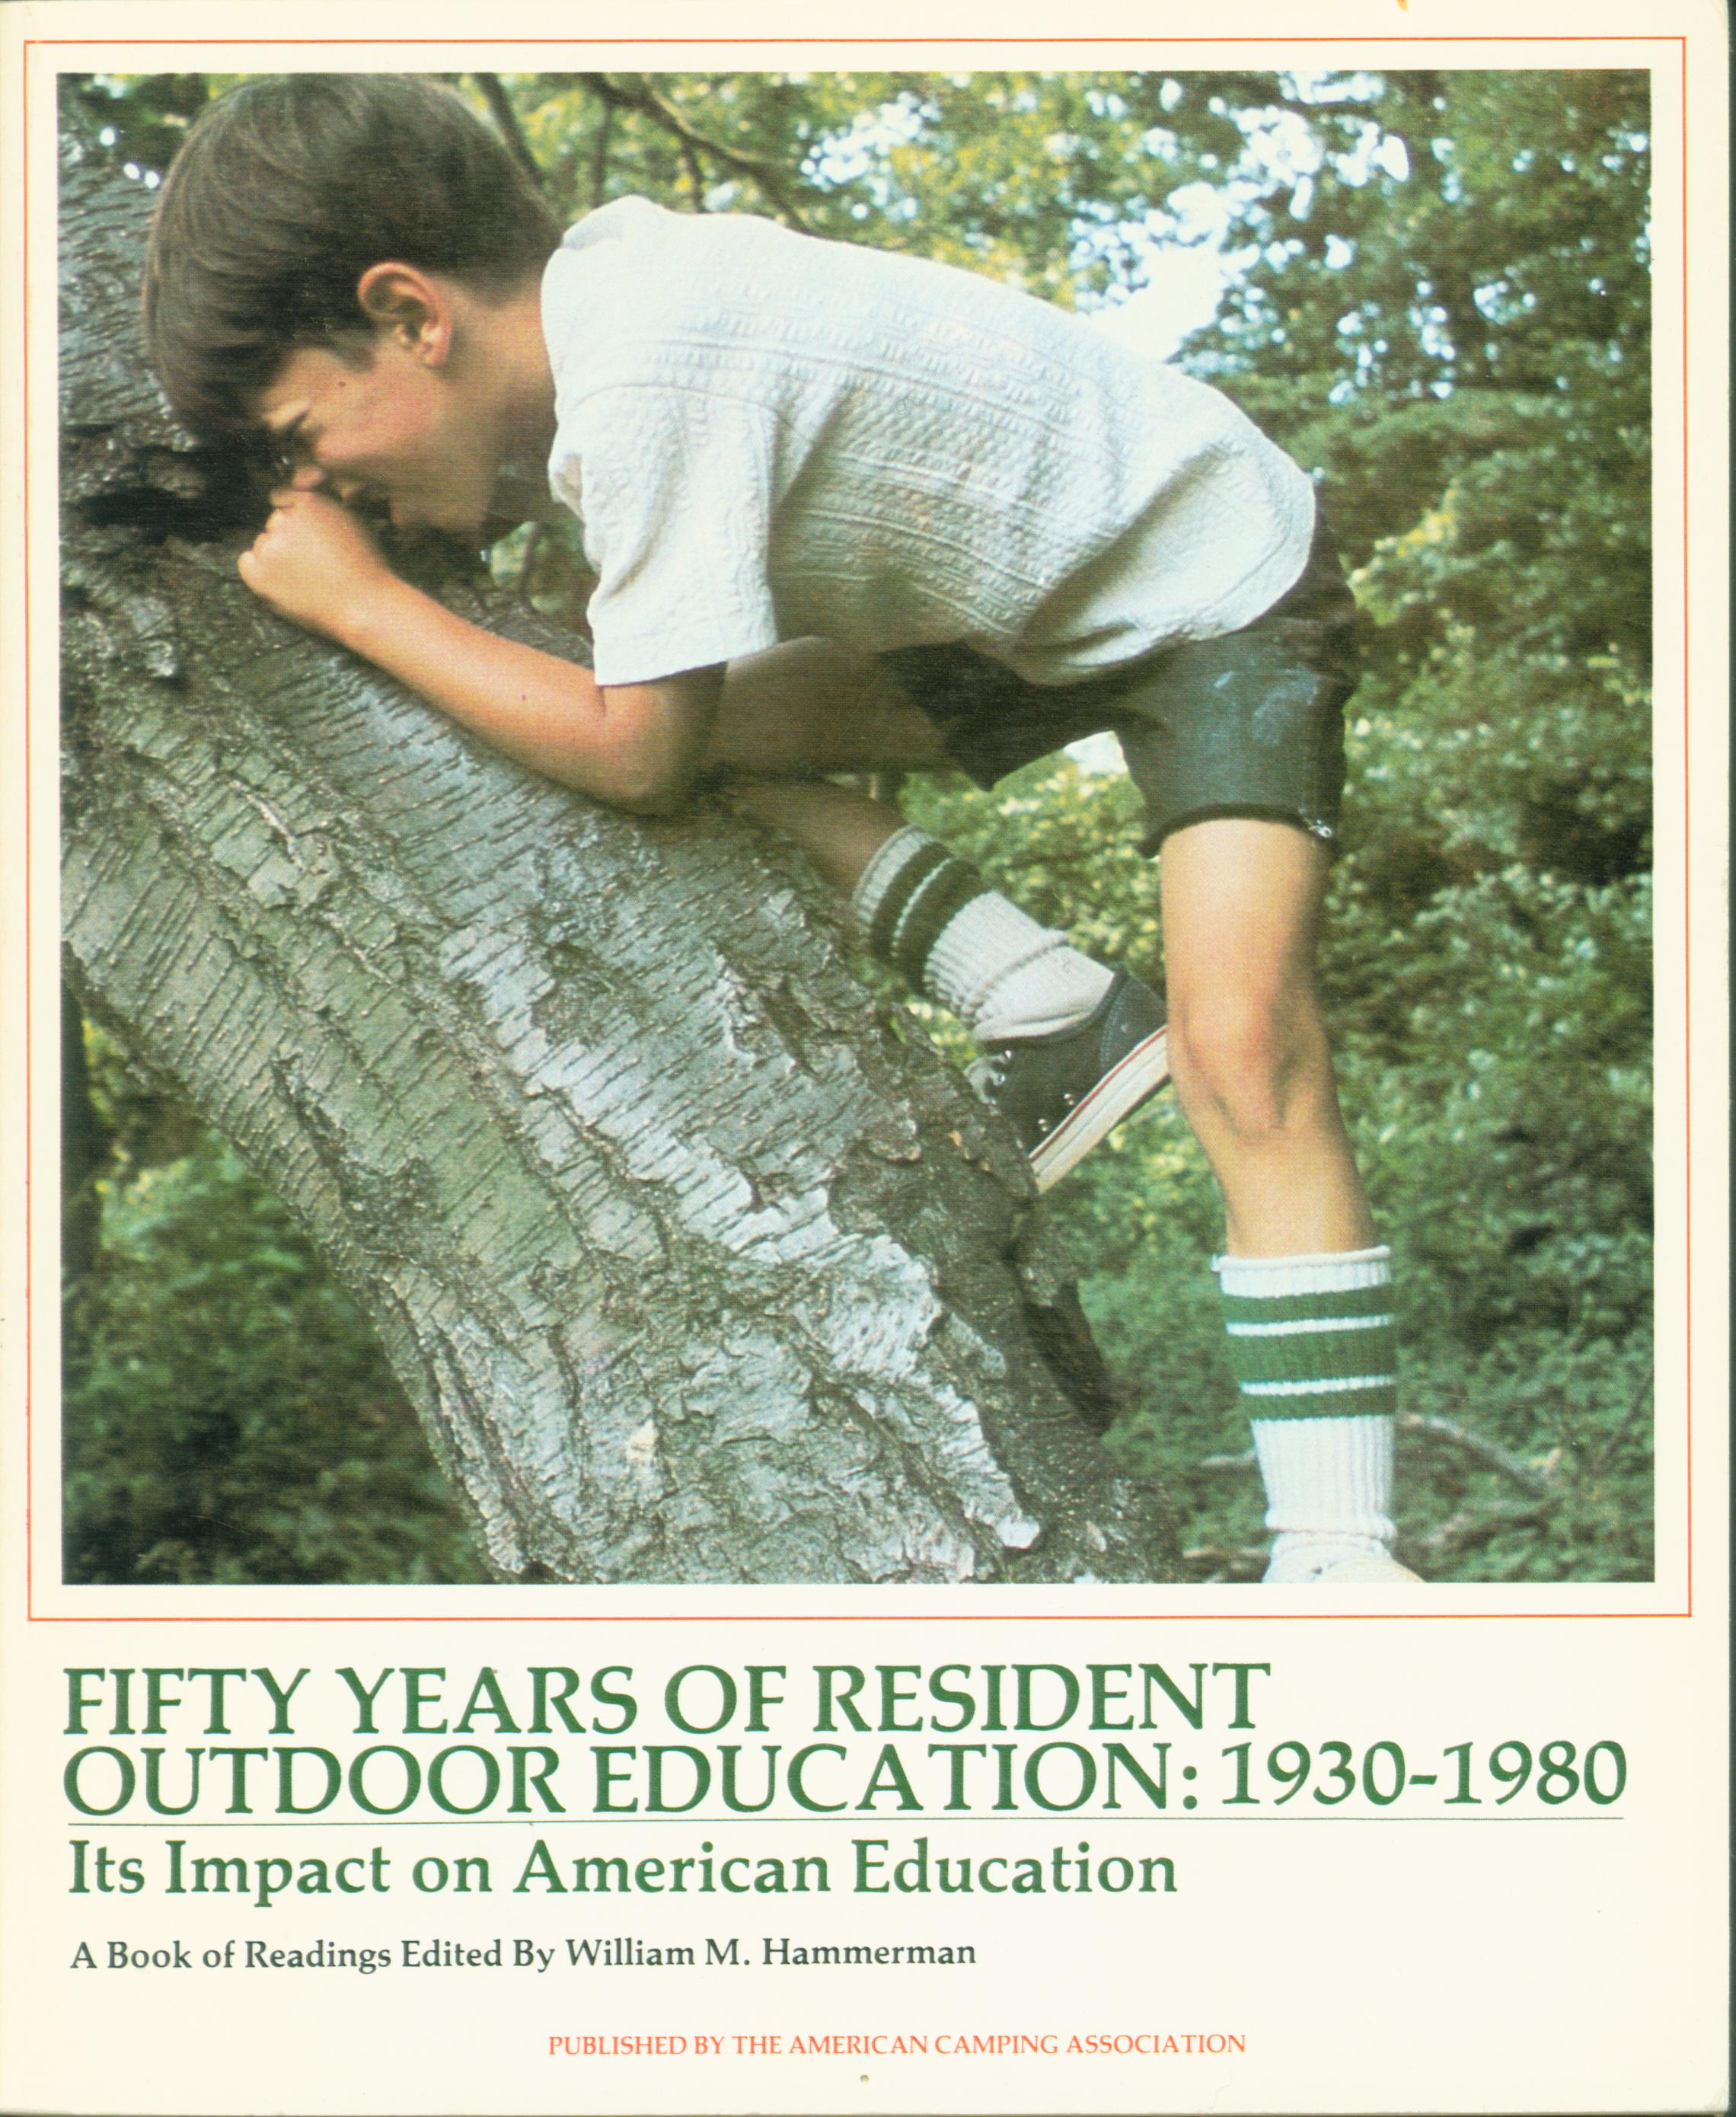 FIFTY YEARS OF RESIDENT OUTDOOR EDUCATION (1930-1980): its impact on American education.